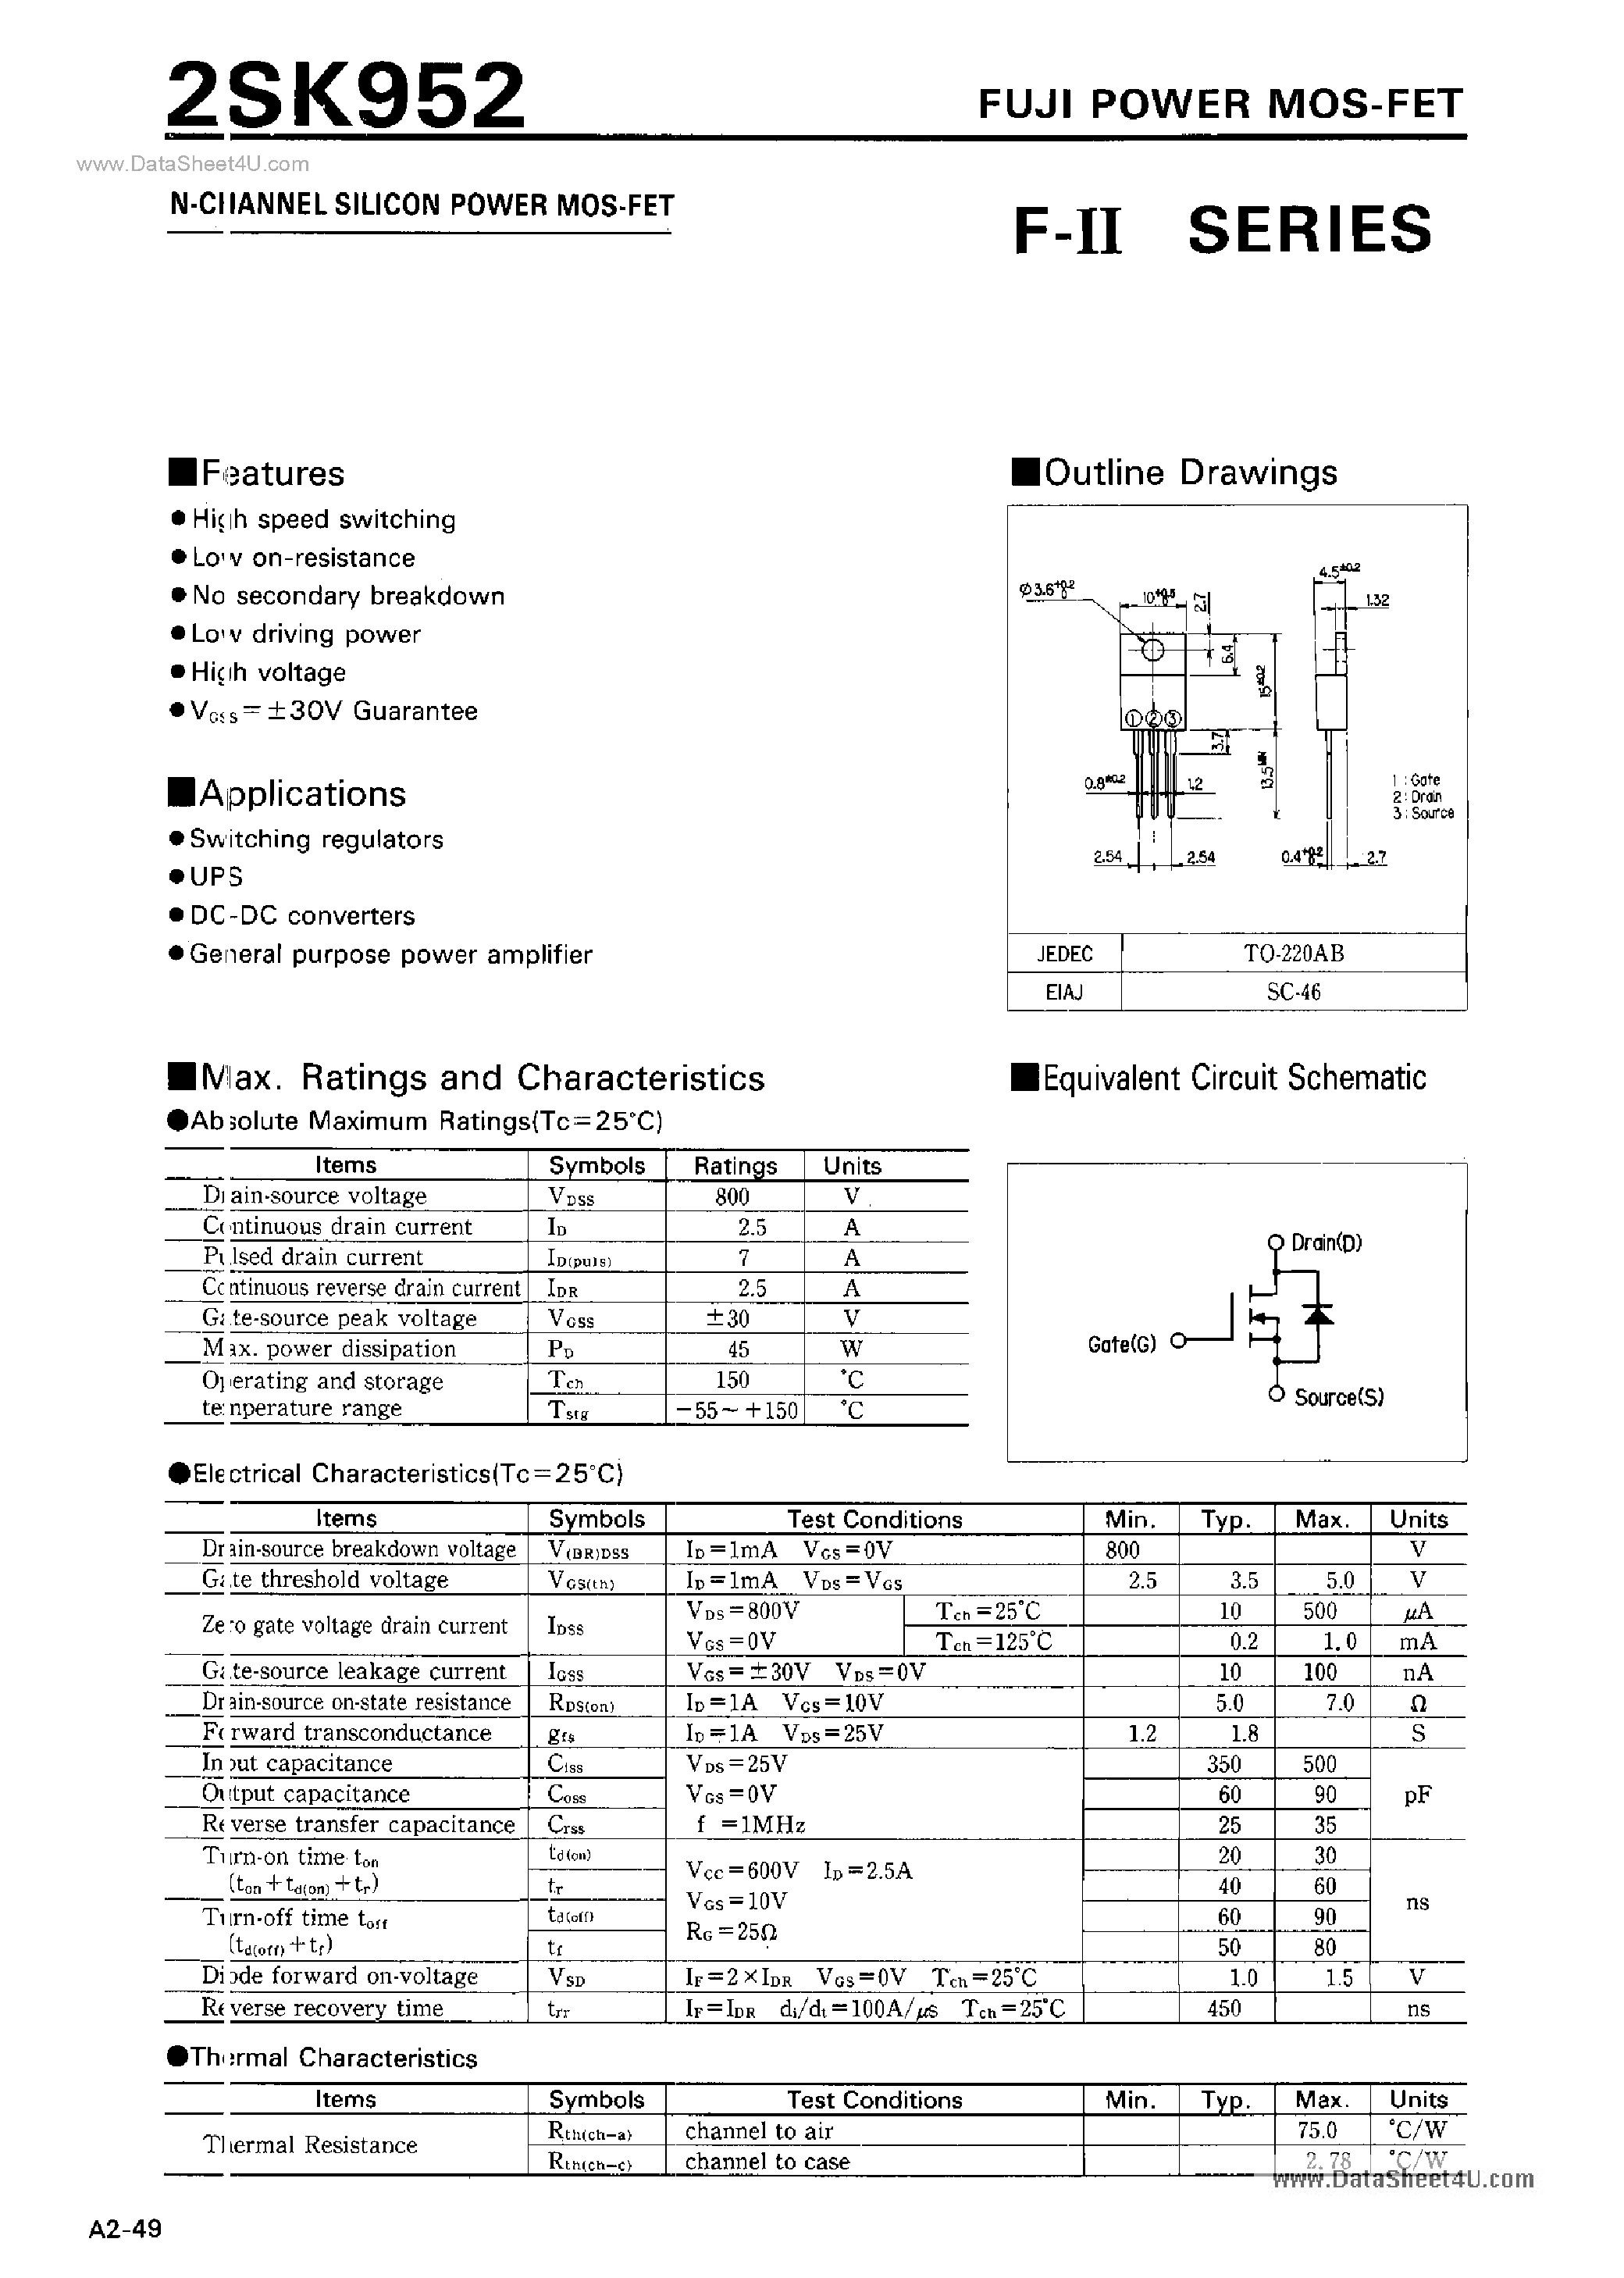 Datasheet K952 - Search -----> 2SK952 page 1